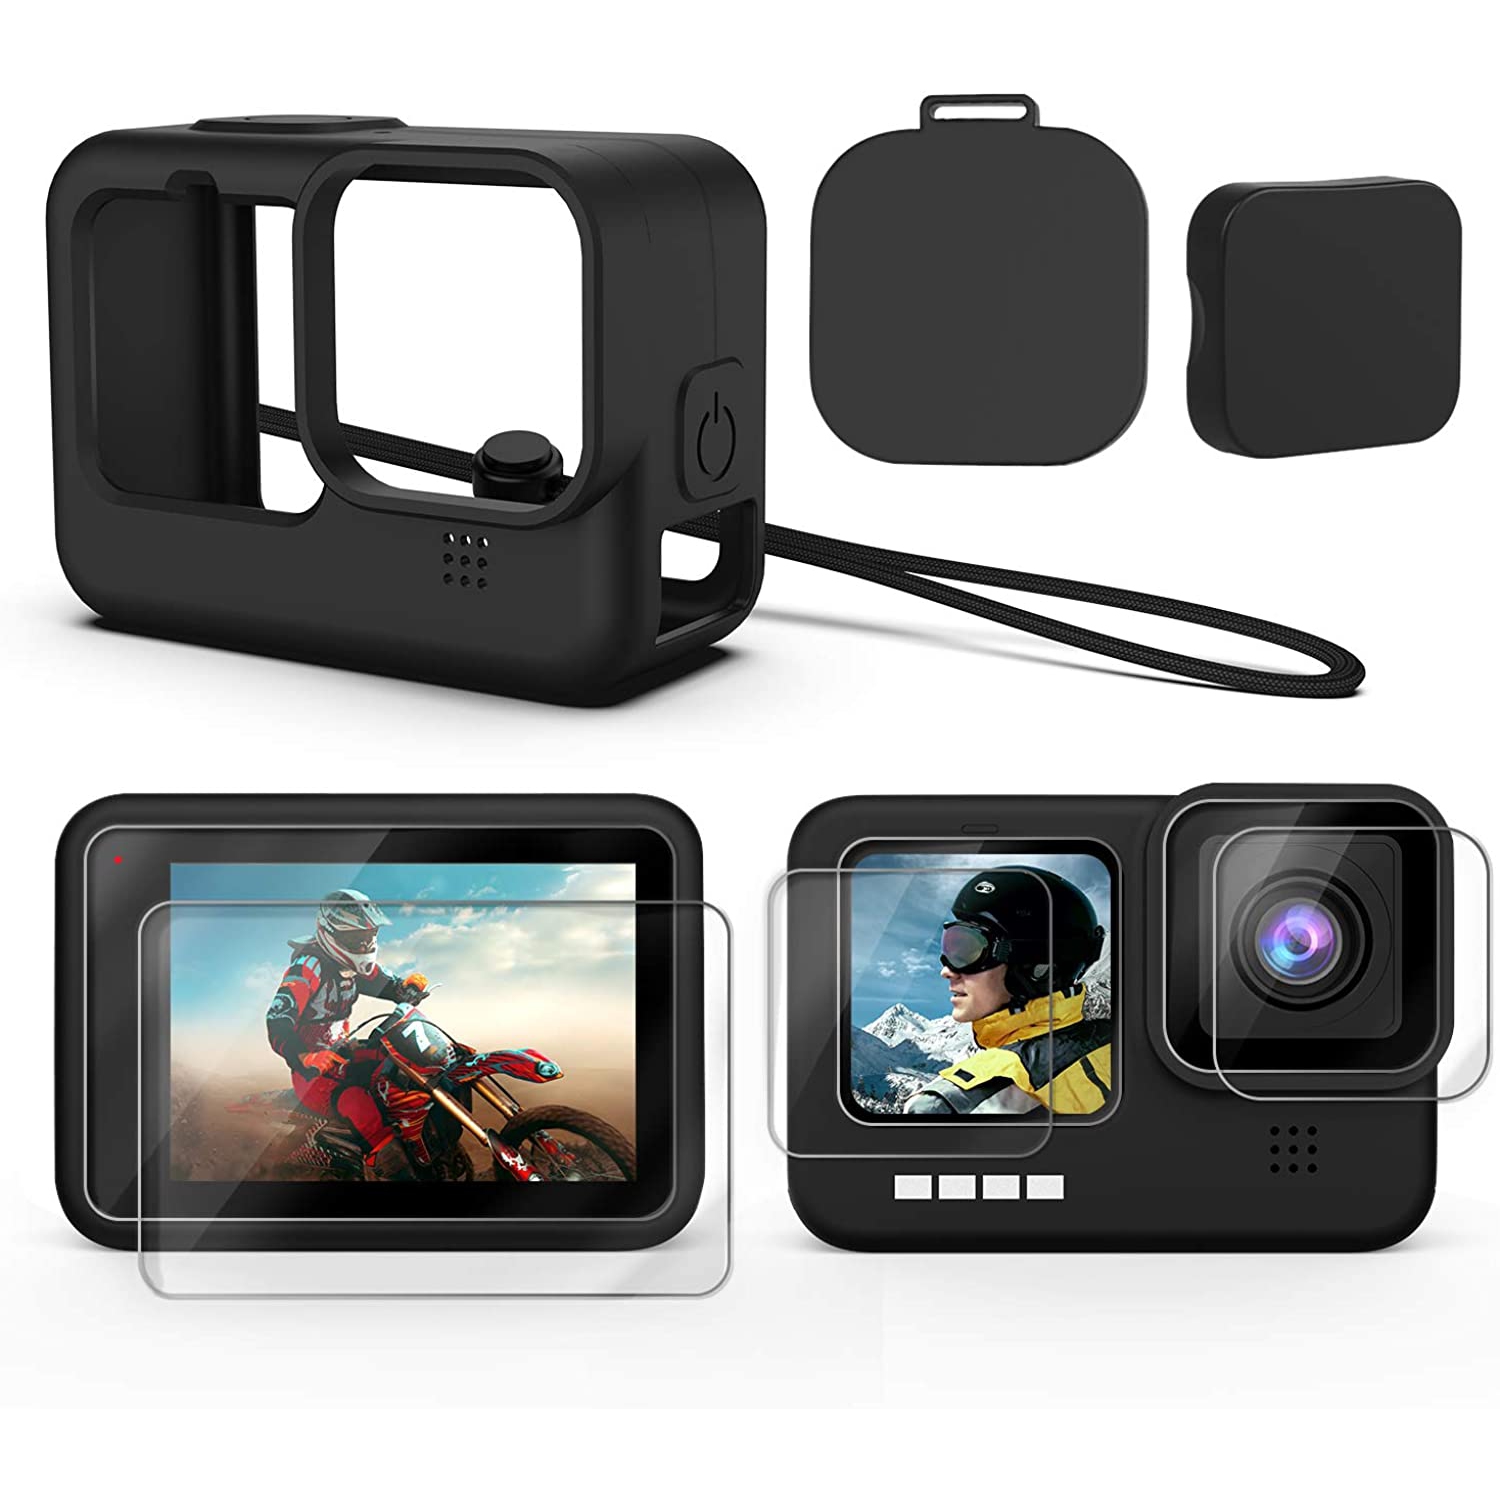 Accessories Kit for GoPro Hero 10/9 Black, Silicone Sleeve Protective Case with Rubber Cap + 6Pcs Tempered Glass Screen Protector with Lens Cover Cap for GoPro Hero 10/9